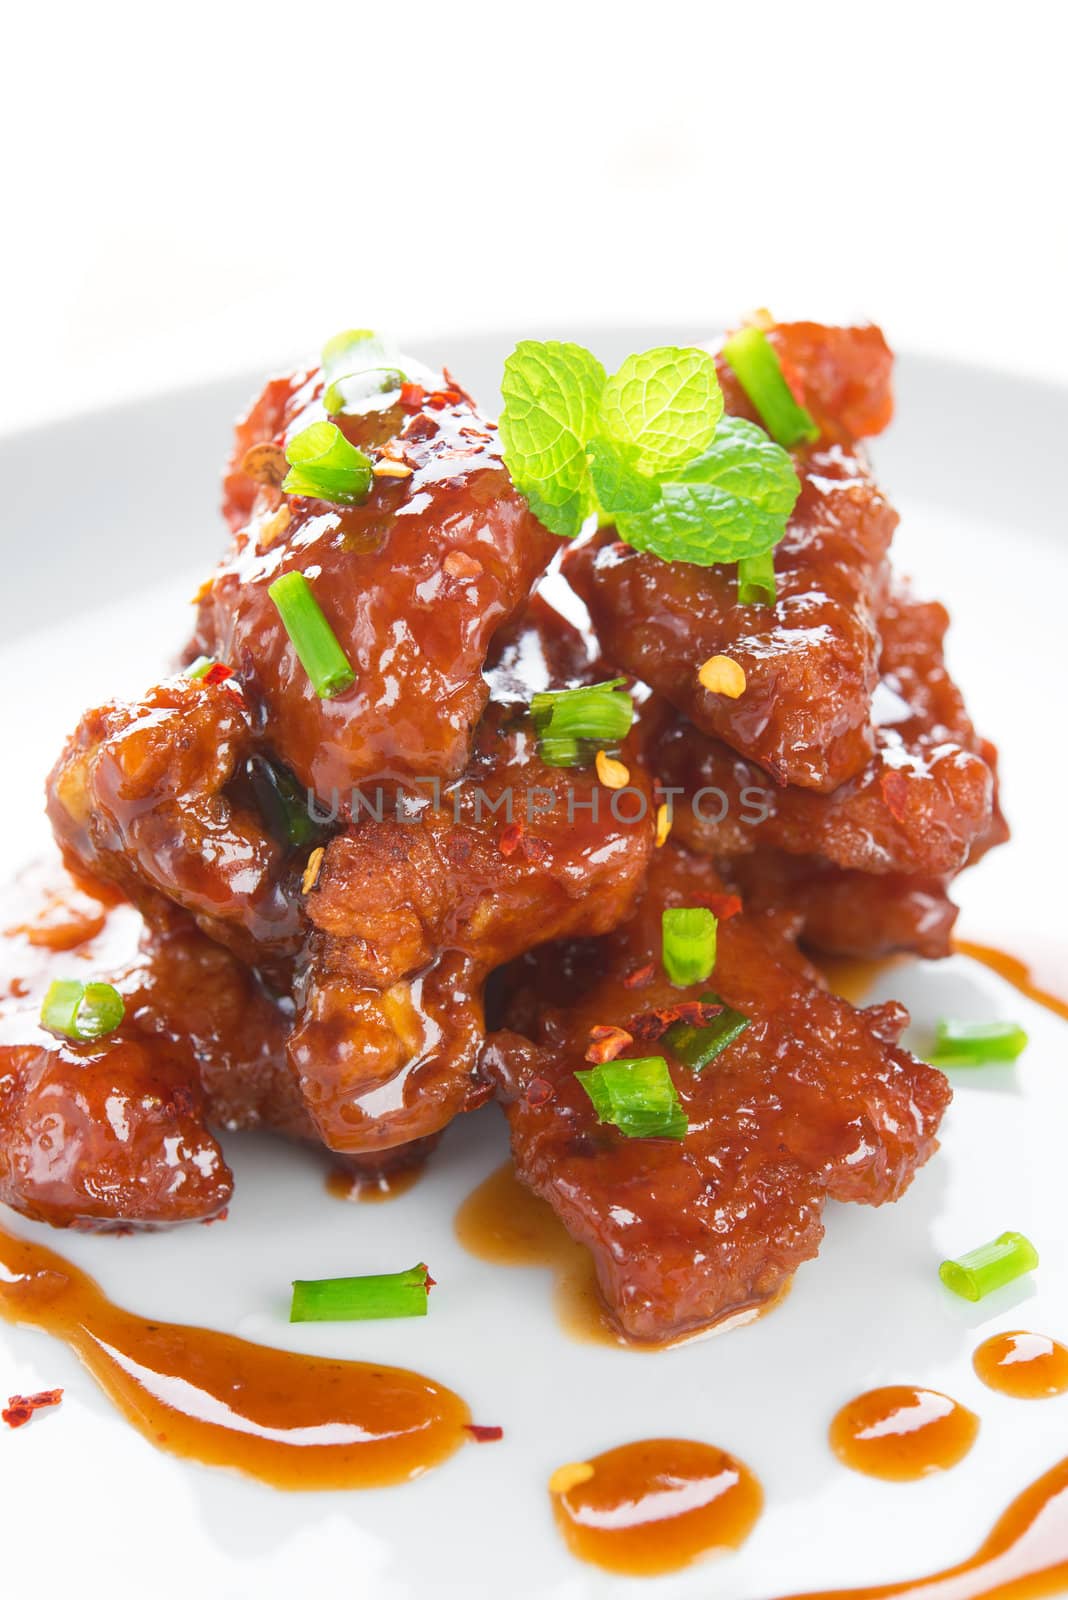 Chinese spare ribs cuisine dish, close up delicious Asian food ready to serve in plate.